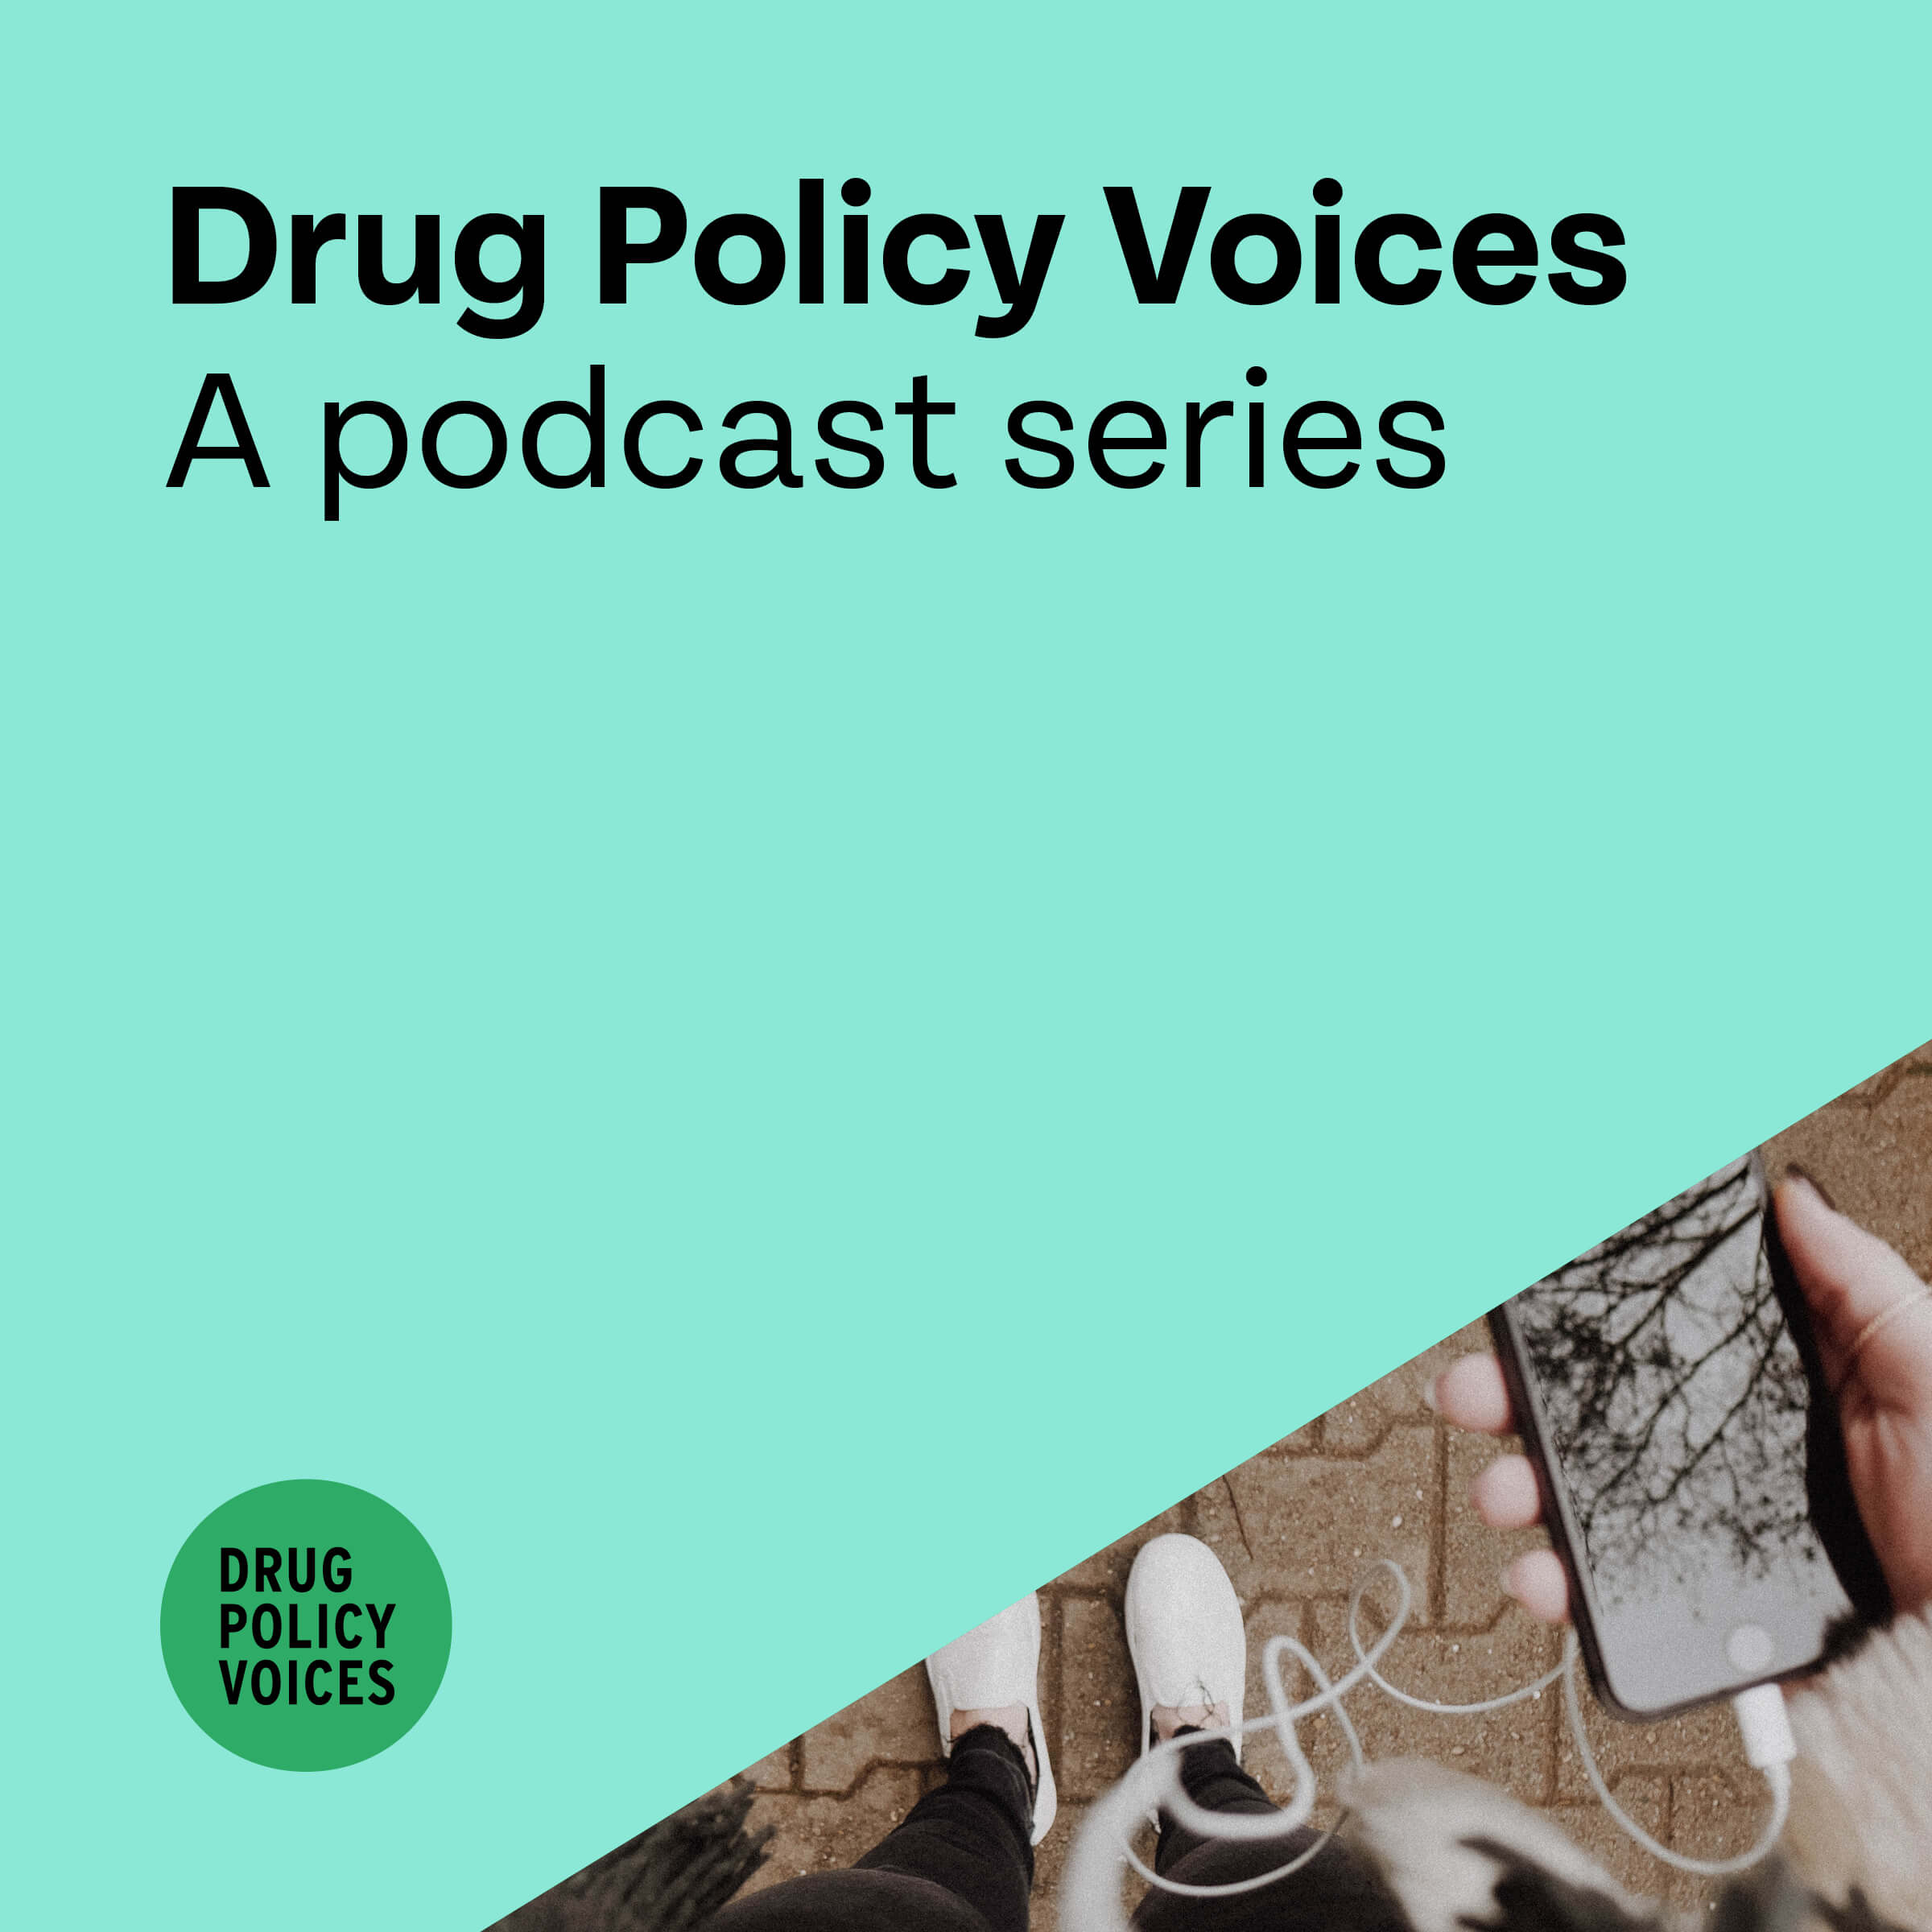 The Drug Policy Voices Podcast